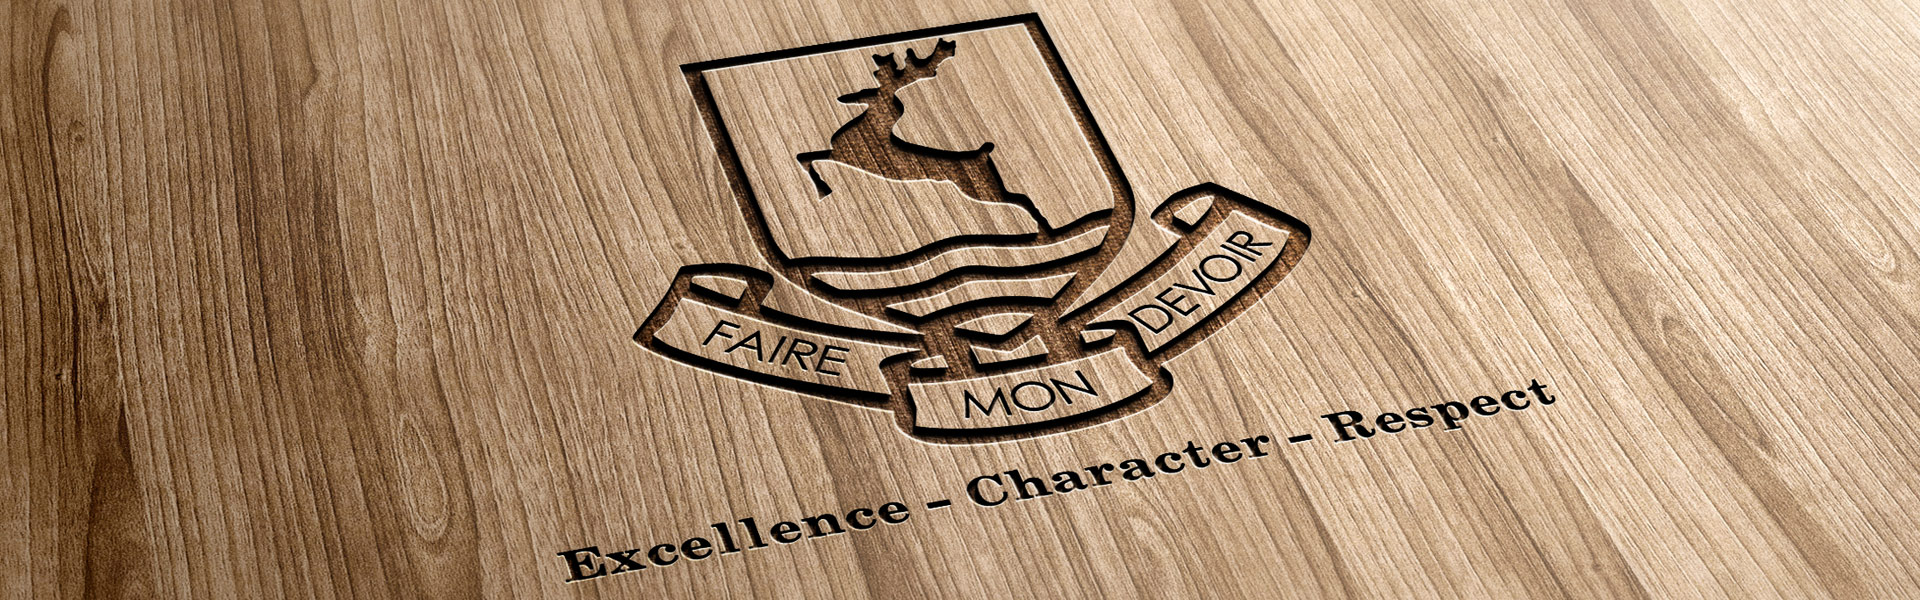 school logo and strapline laser-etched into wood